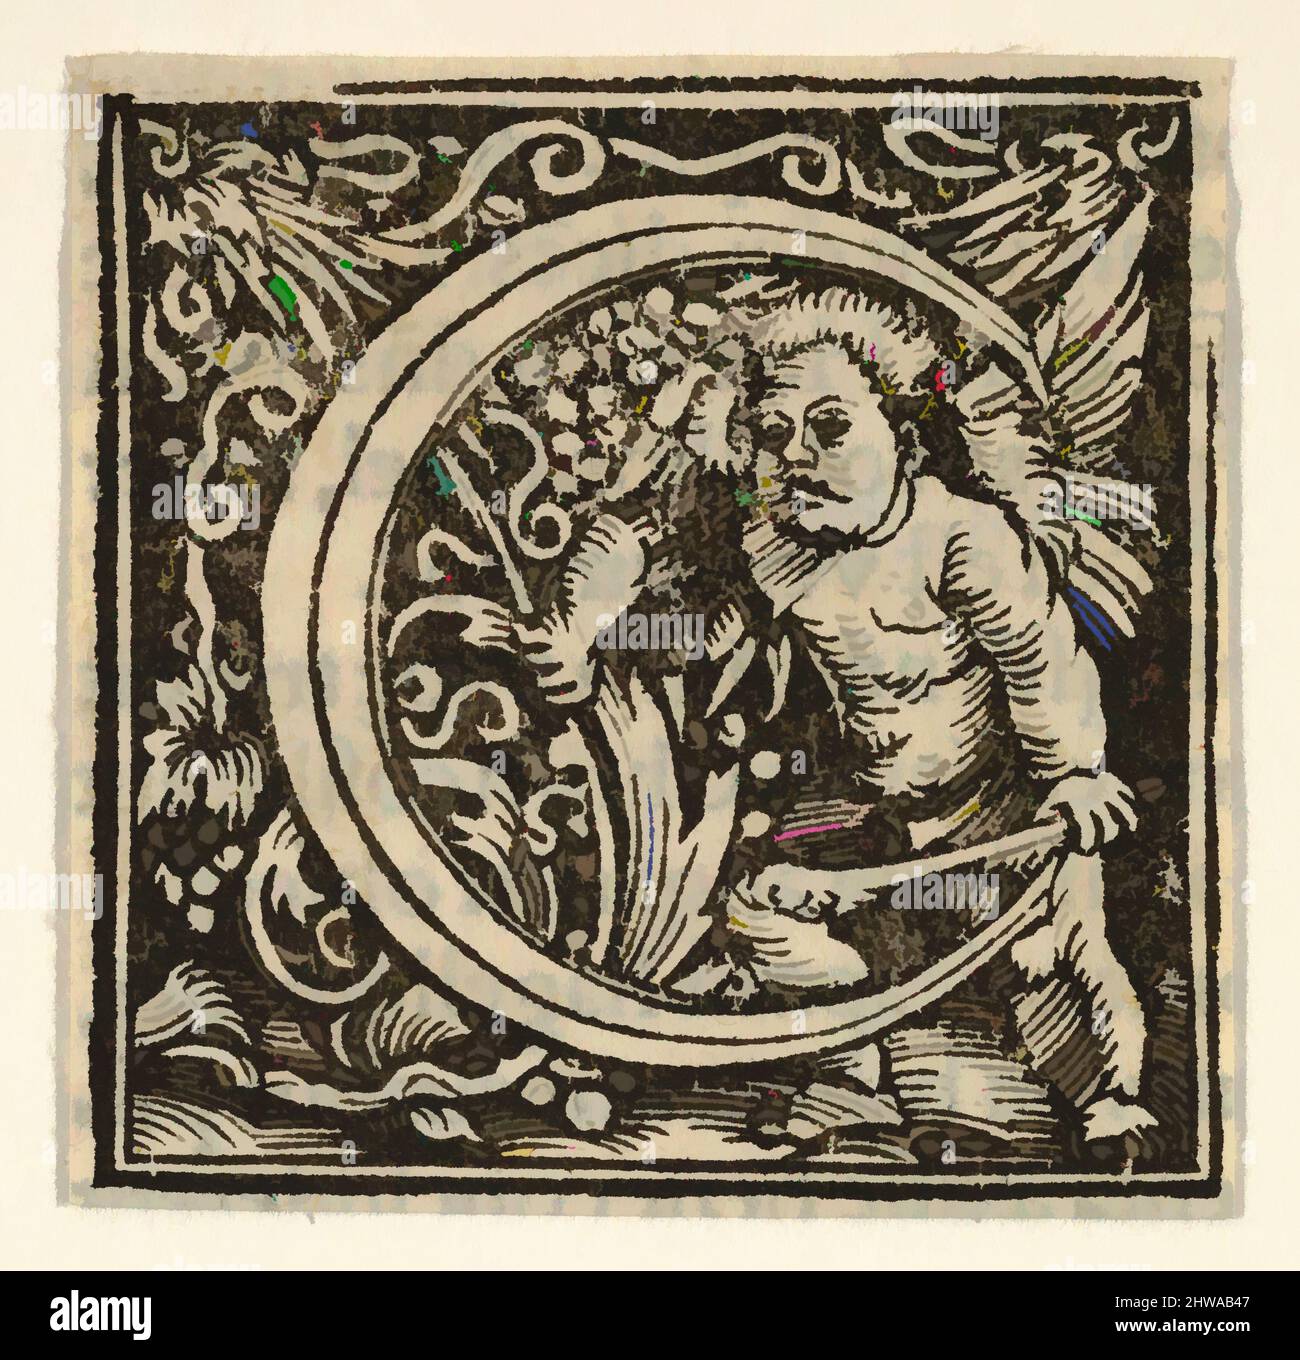 Art inspired by Drawings and Prints, Print, Initial letter C with putto, Artist, Heinrich Vogtherr the Elder, German, born 1490, active 1538, Classic works modernized by Artotop with a splash of modernity. Shapes, color and value, eye-catching visual impact on art. Emotions through freedom of artworks in a contemporary way. A timeless message pursuing a wildly creative new direction. Artists turning to the digital medium and creating the Artotop NFT Stock Photo